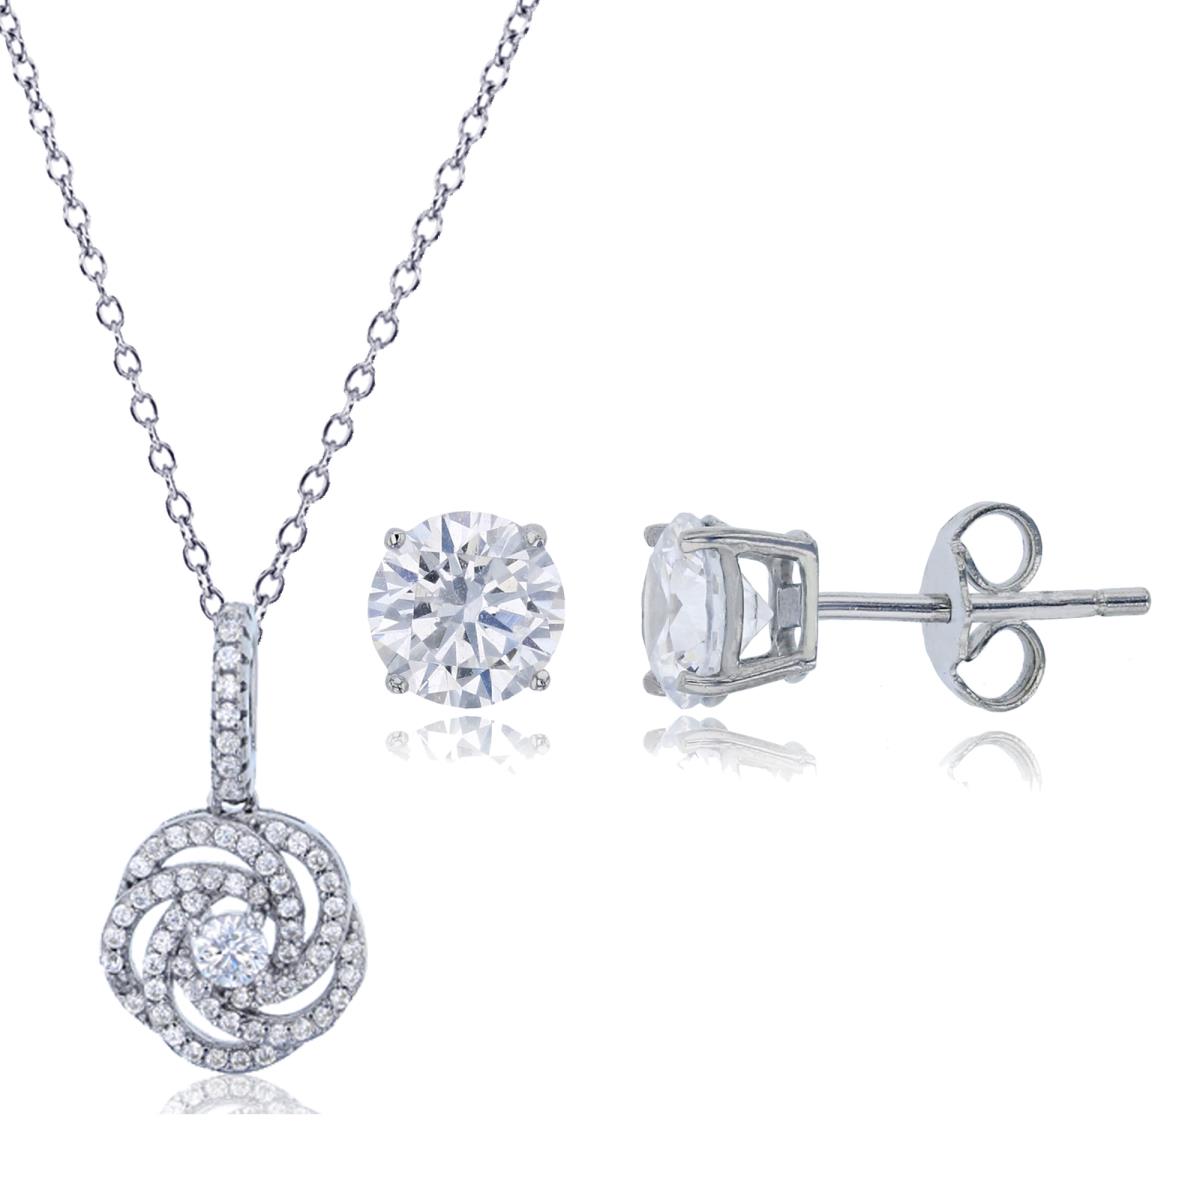 Sterling Silver Rhodium Micropave 3.25 Round Cut Knot 18"+2" Necklace & 6mm Round Solitaire Stud Earring Set